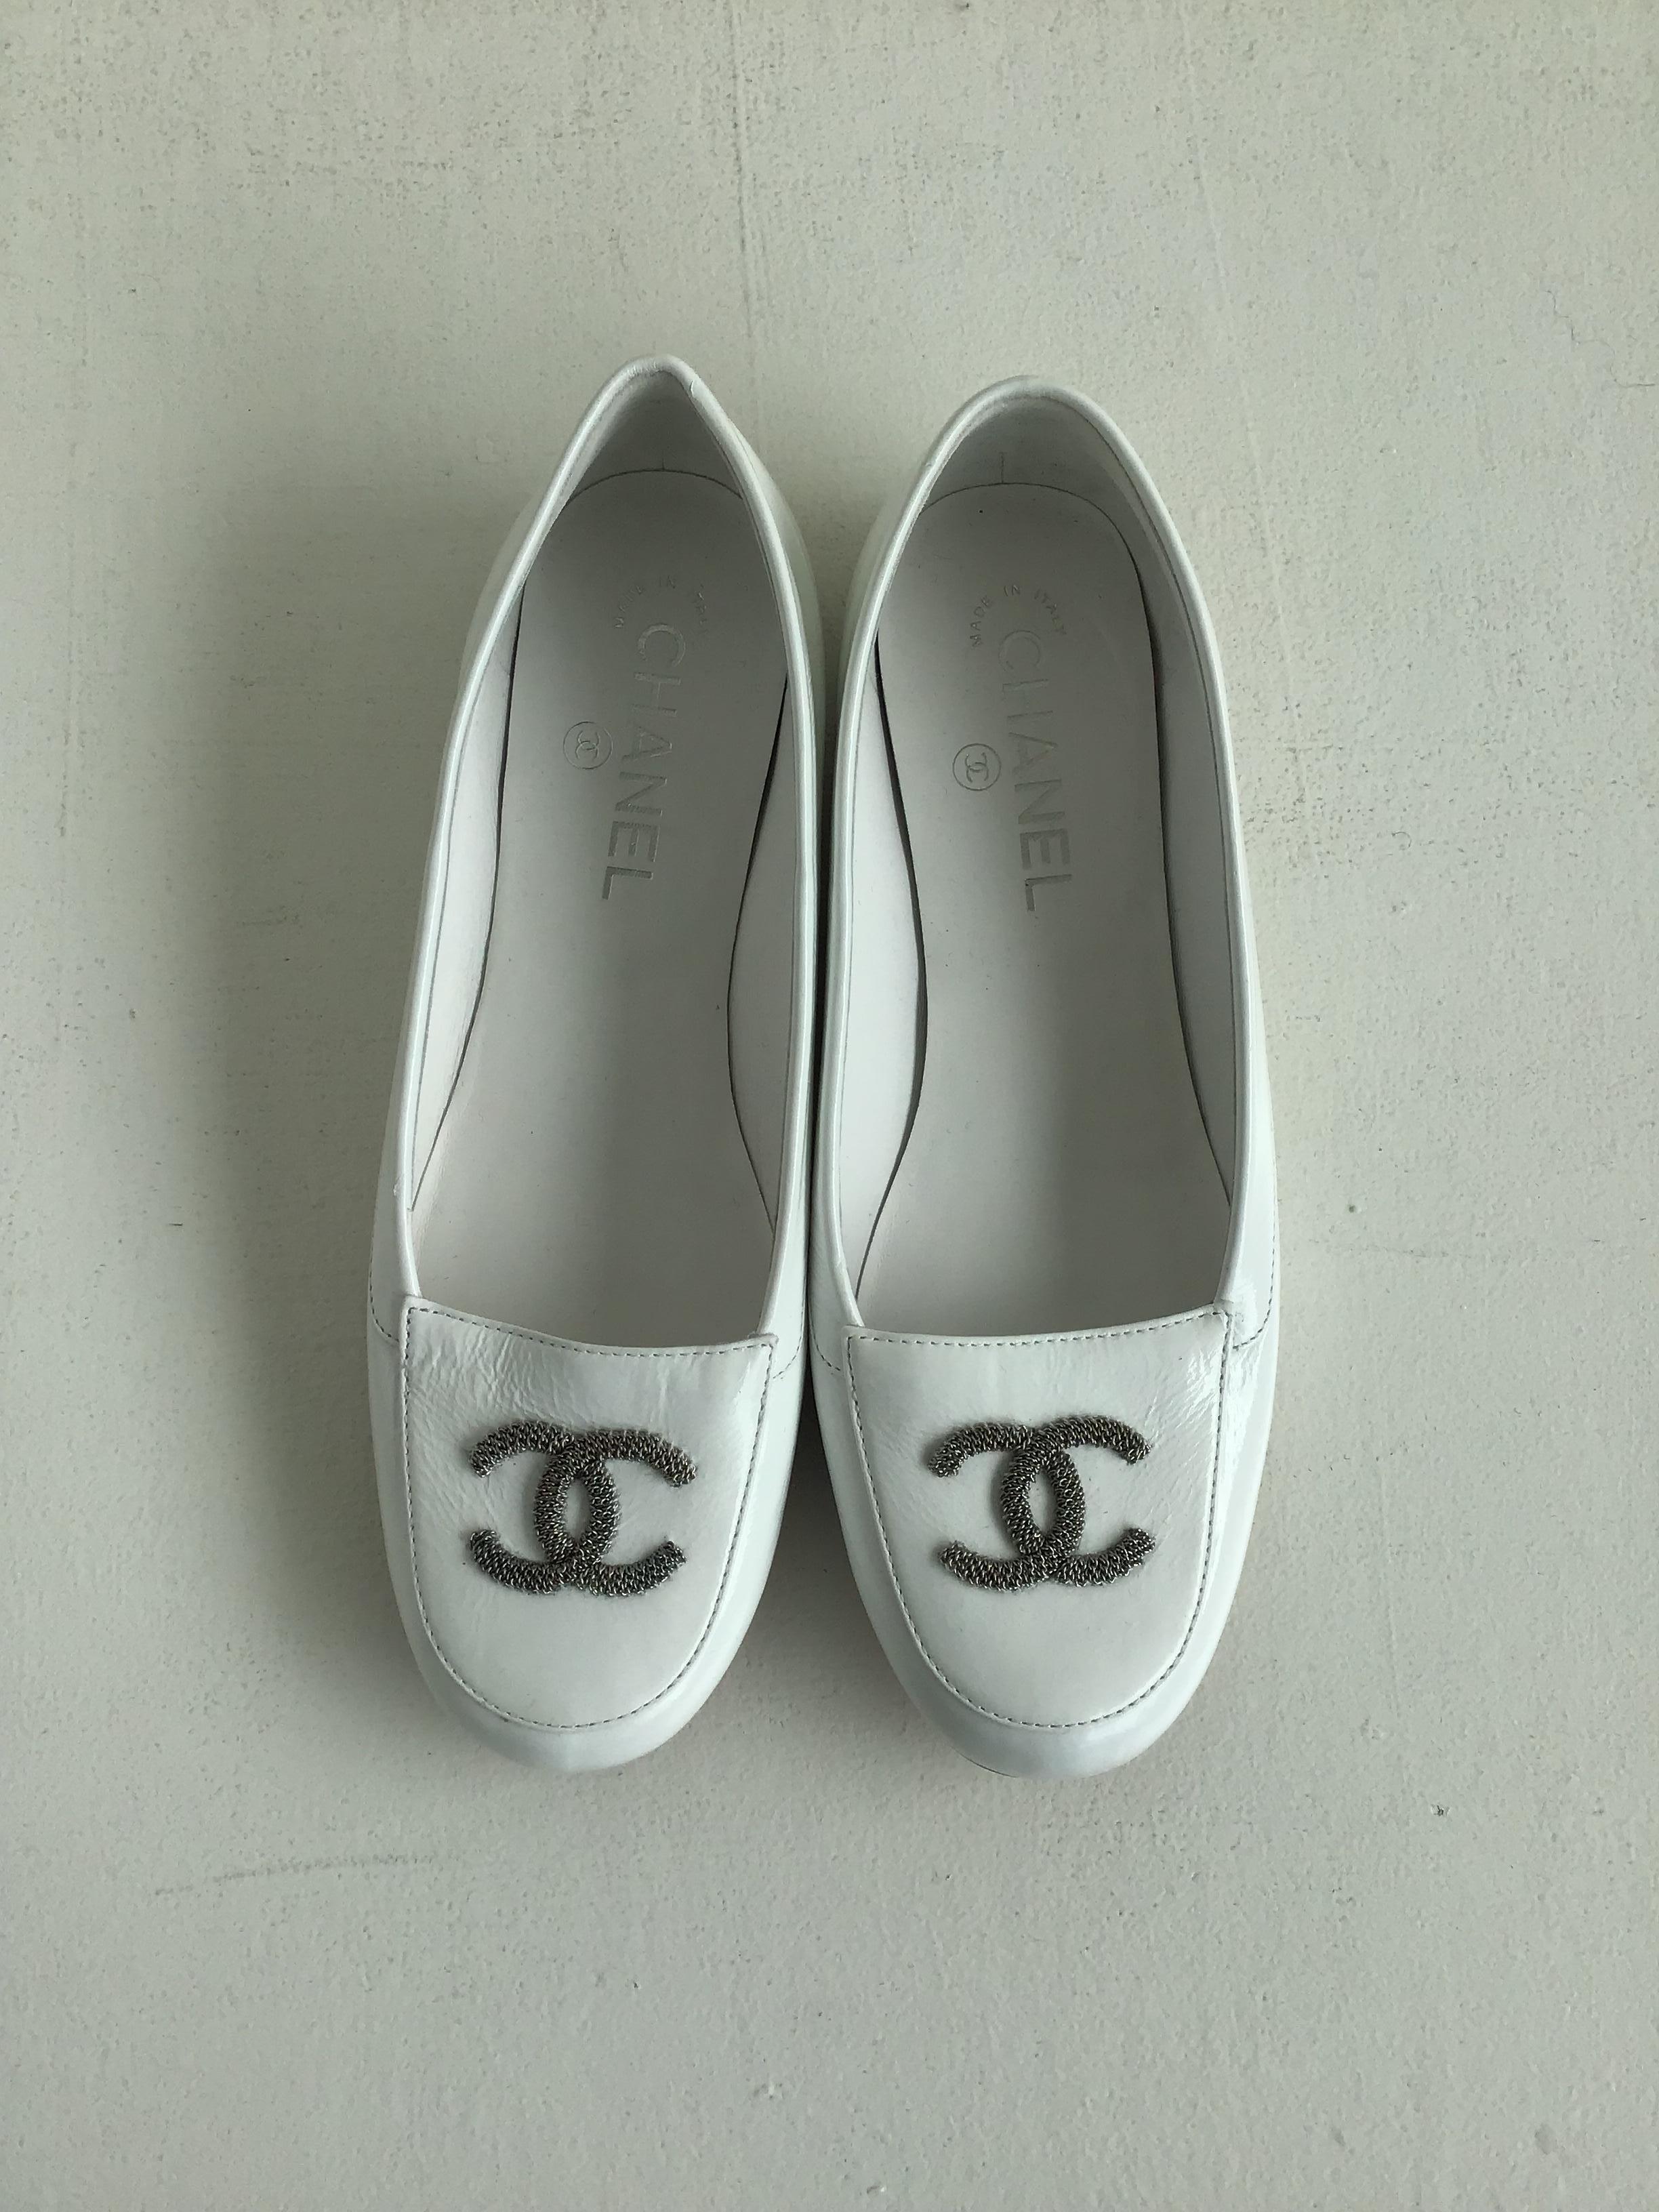 Chanel White Patent Leather Loafers, size 7.5

Description:
Material: White Patent Leather
Design: Silver metal CC Logo on toe box
*Slight discoloration on the left side of the left shoe, please see last image.